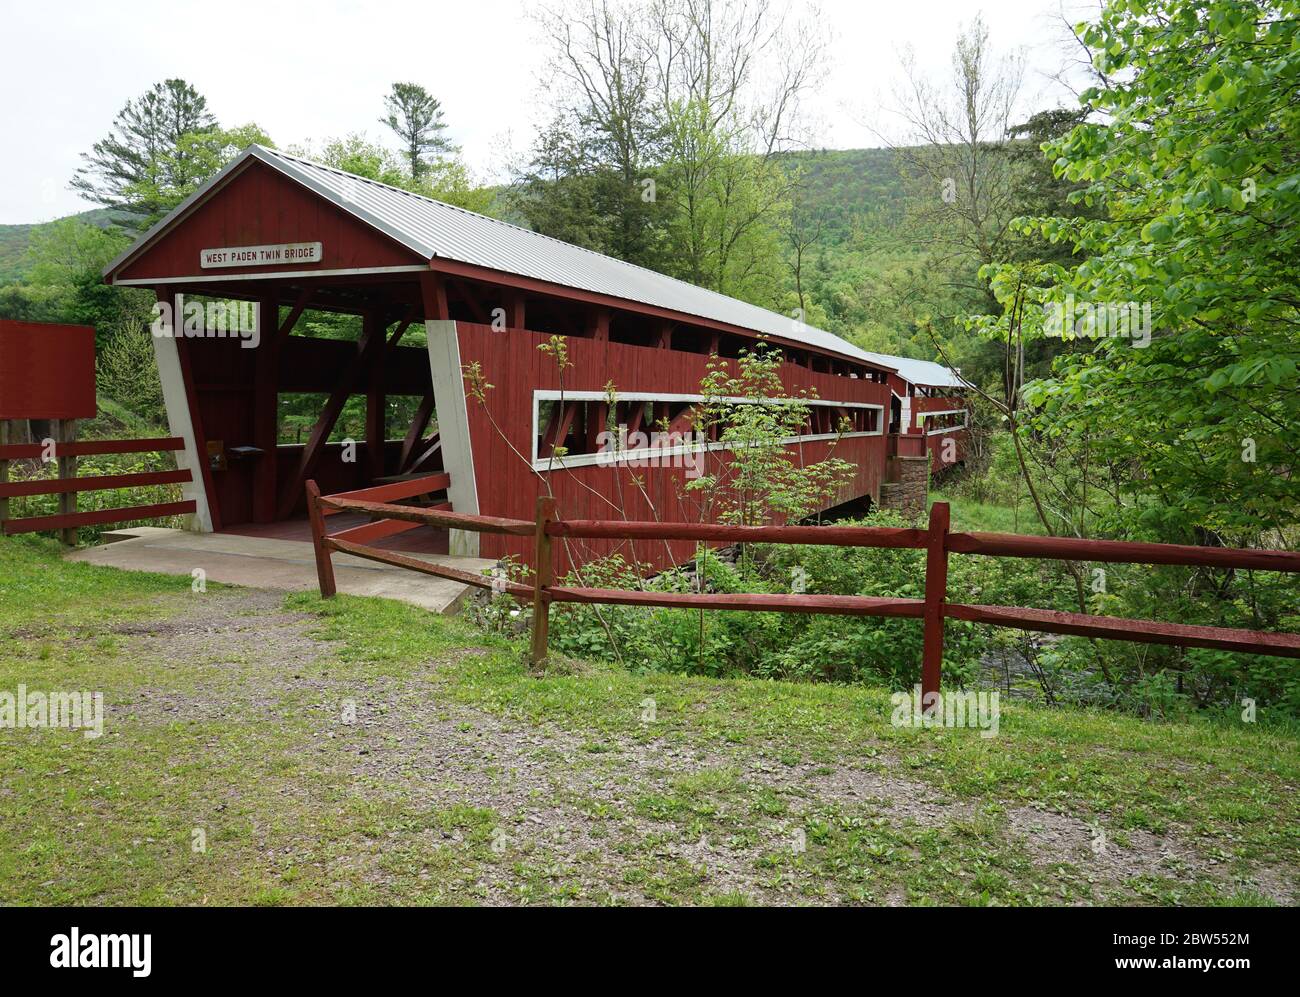 The Twin bridges of East Paden and West Paden by Huntington Creek, in Fishing Creek Township, in Pennsylvania.   The bridges are the only remaining tw Stock Photo